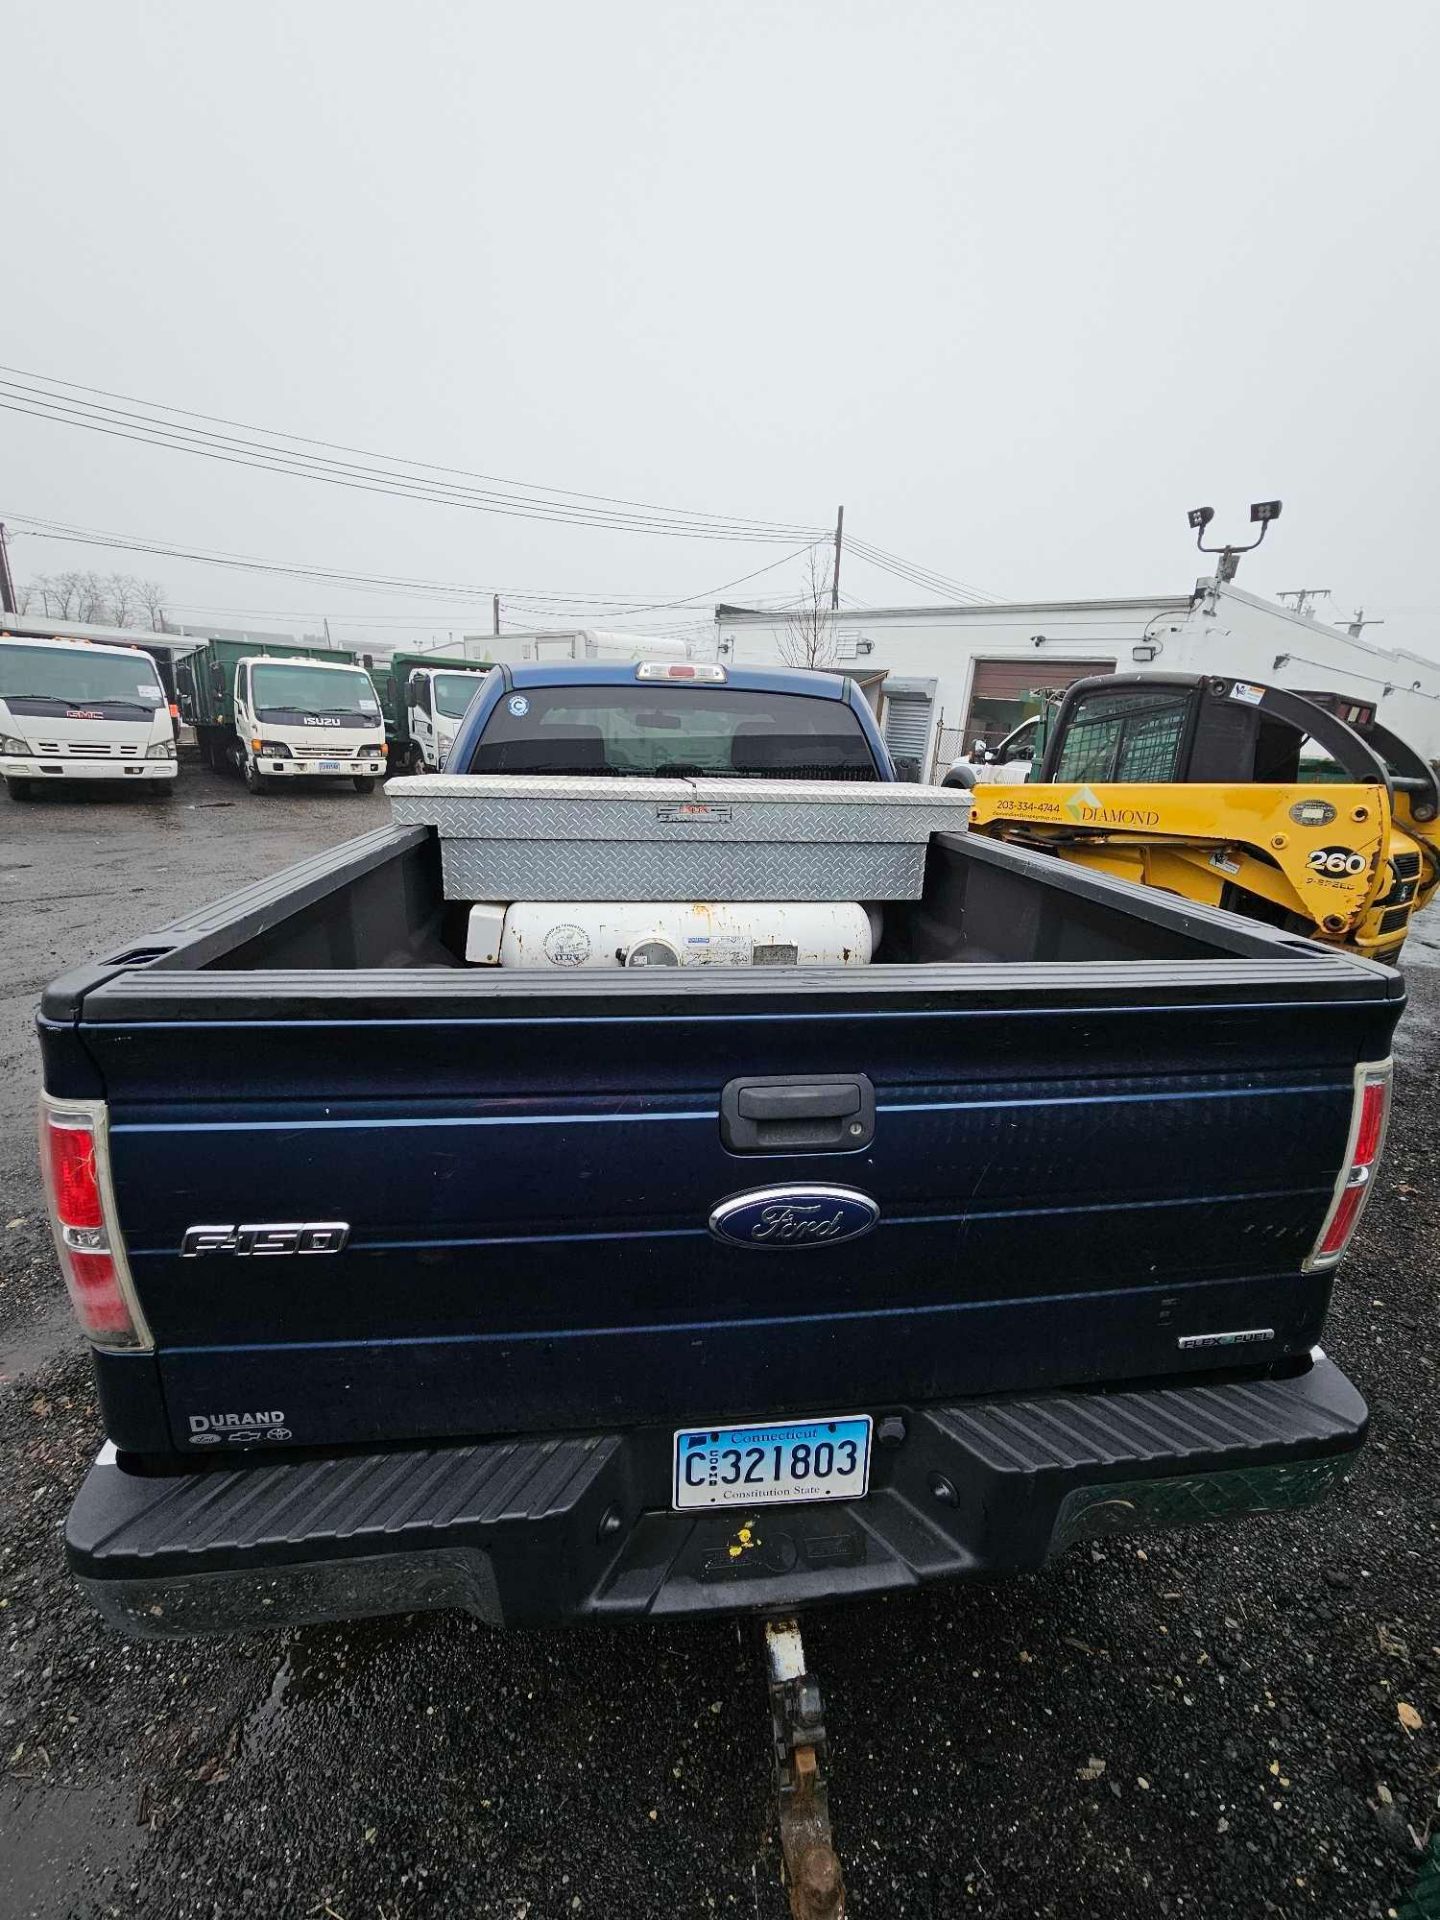 2014 Ford F150 Extended Cab Pickup - Image 3 of 9